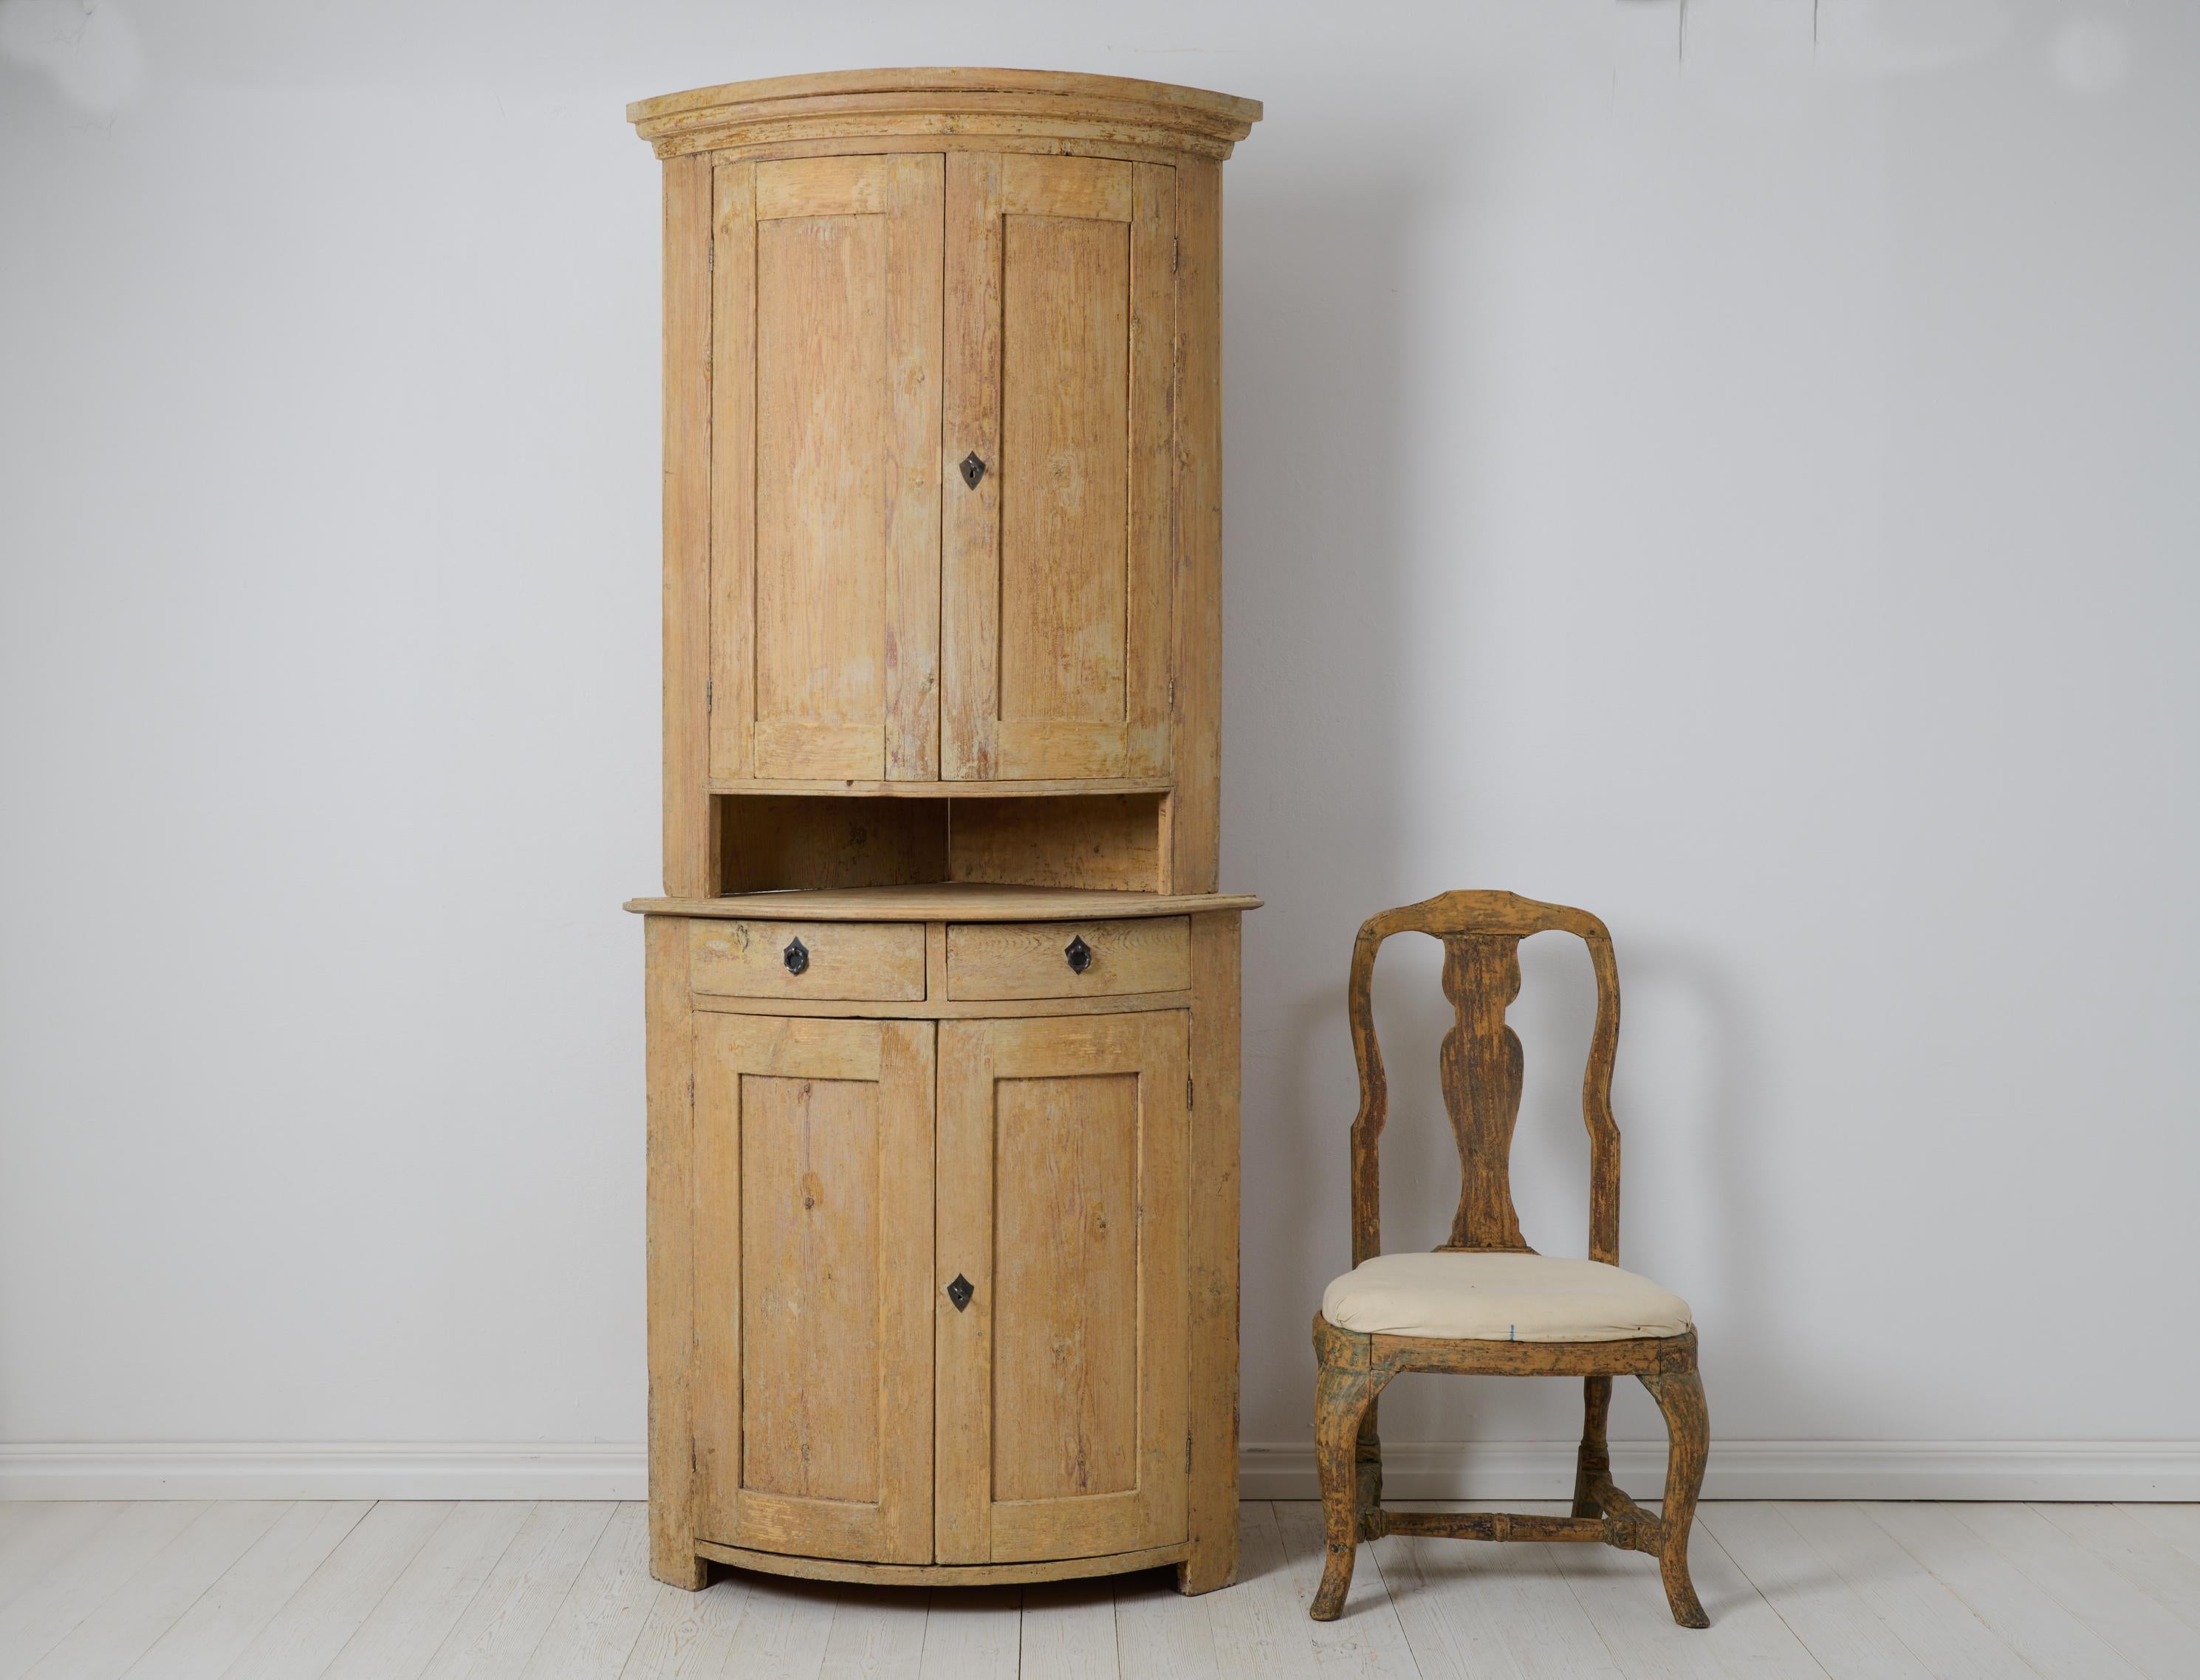 Antique Genuine Northern Swedish Country Gustavian Style Rustic Corner Cabinet In Good Condition For Sale In Kramfors, SE